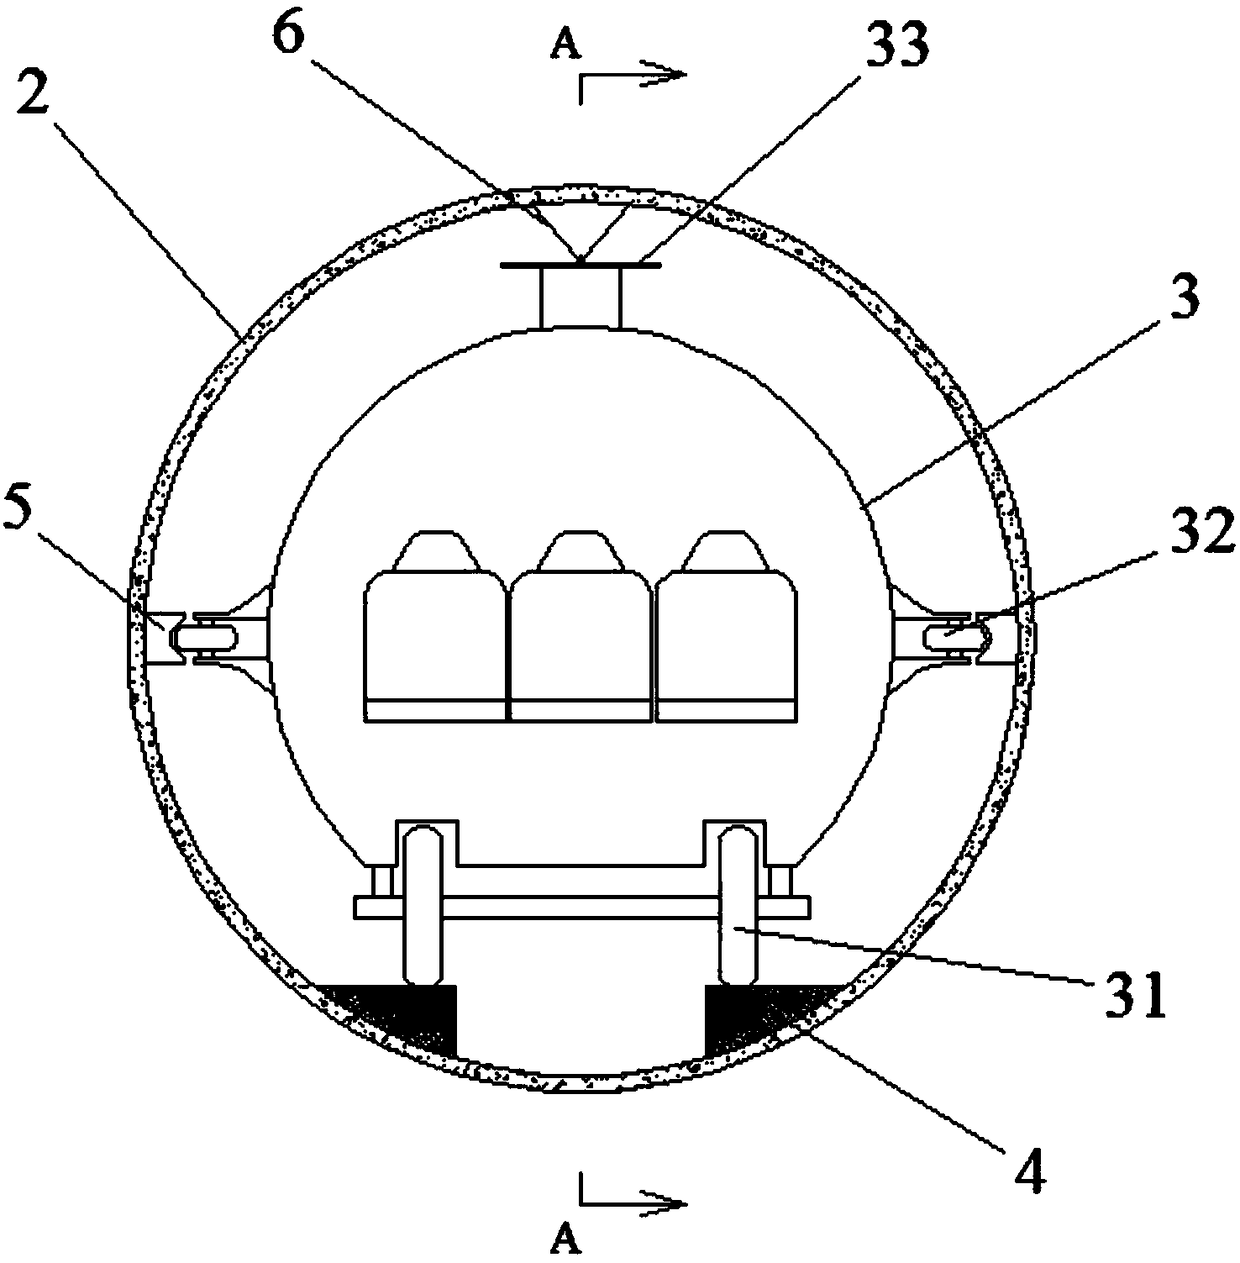 Undersea vacuum pipeline transportation system for wheeled vehicle equipped with side guide wheels